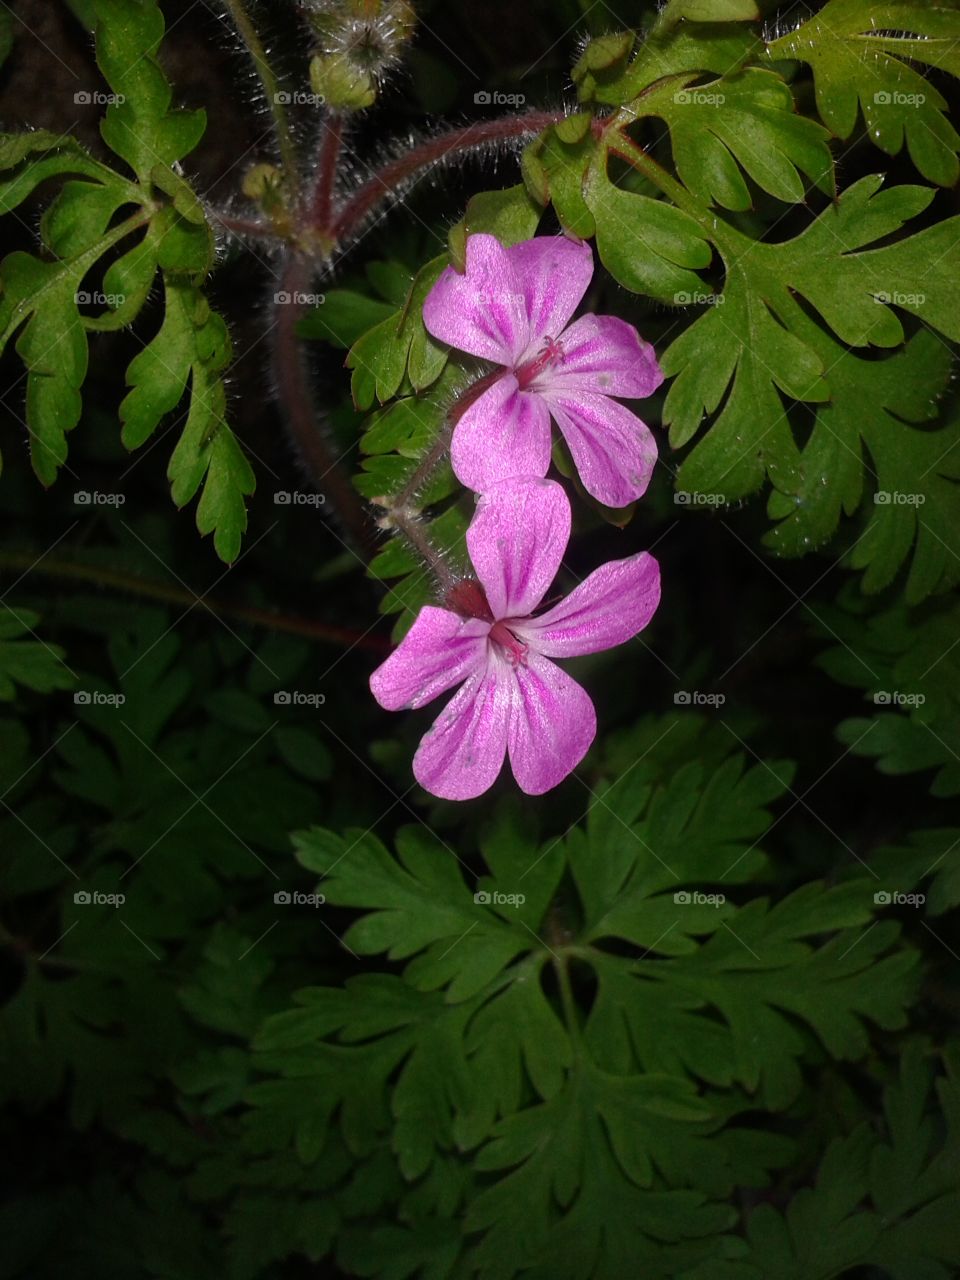 wild flowers. I love to foto flowers and anything else that I find interesting enuf tp sharr. 